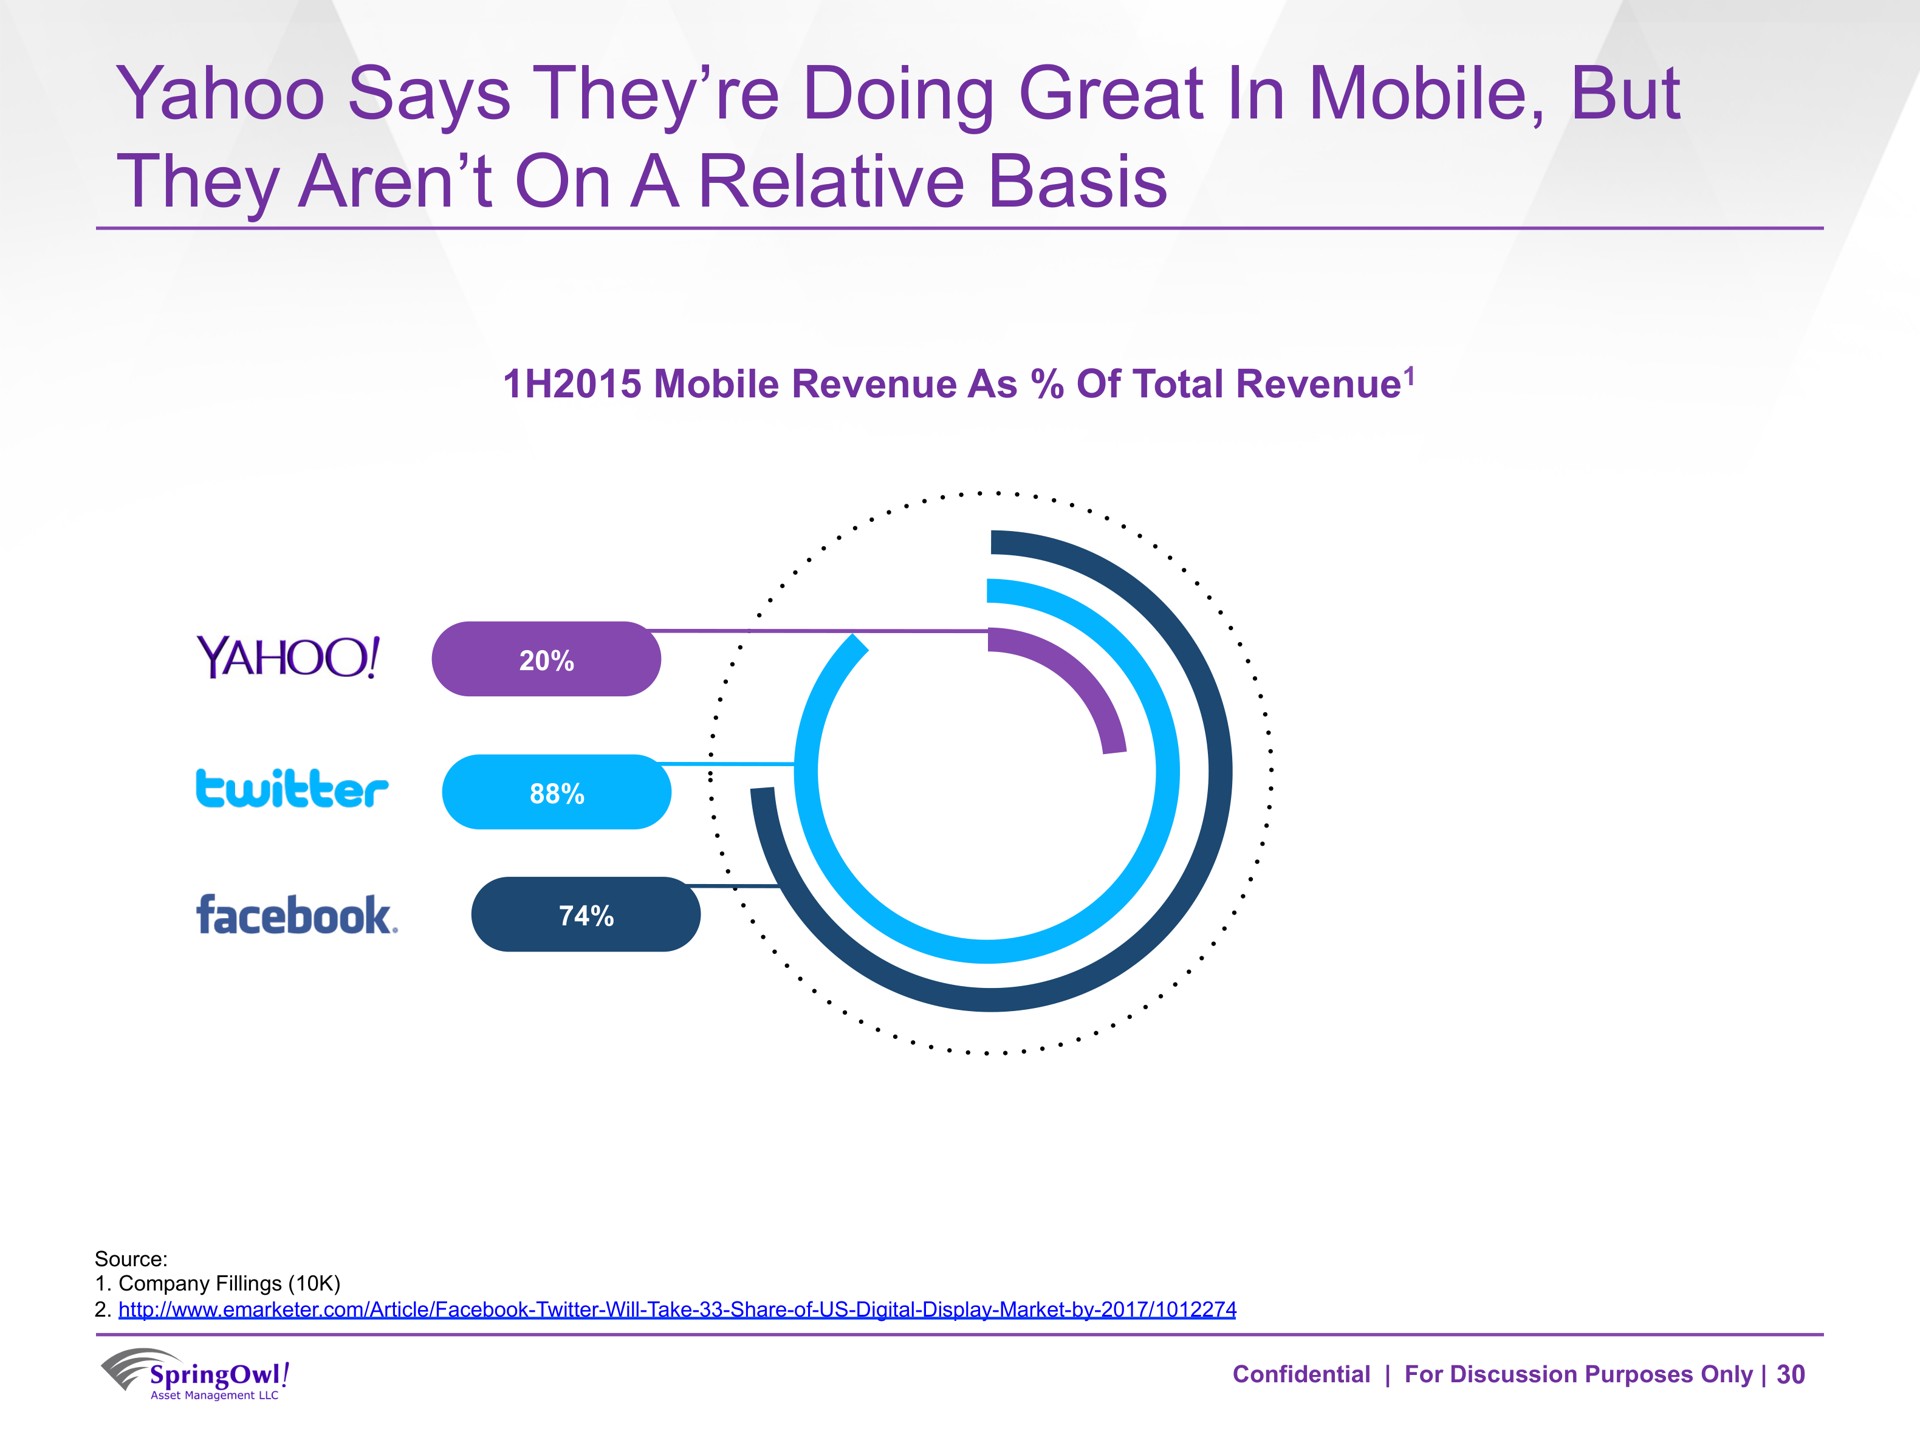 yahoo says they doing great in mobile but they on a relative basis woo | SpringOwl